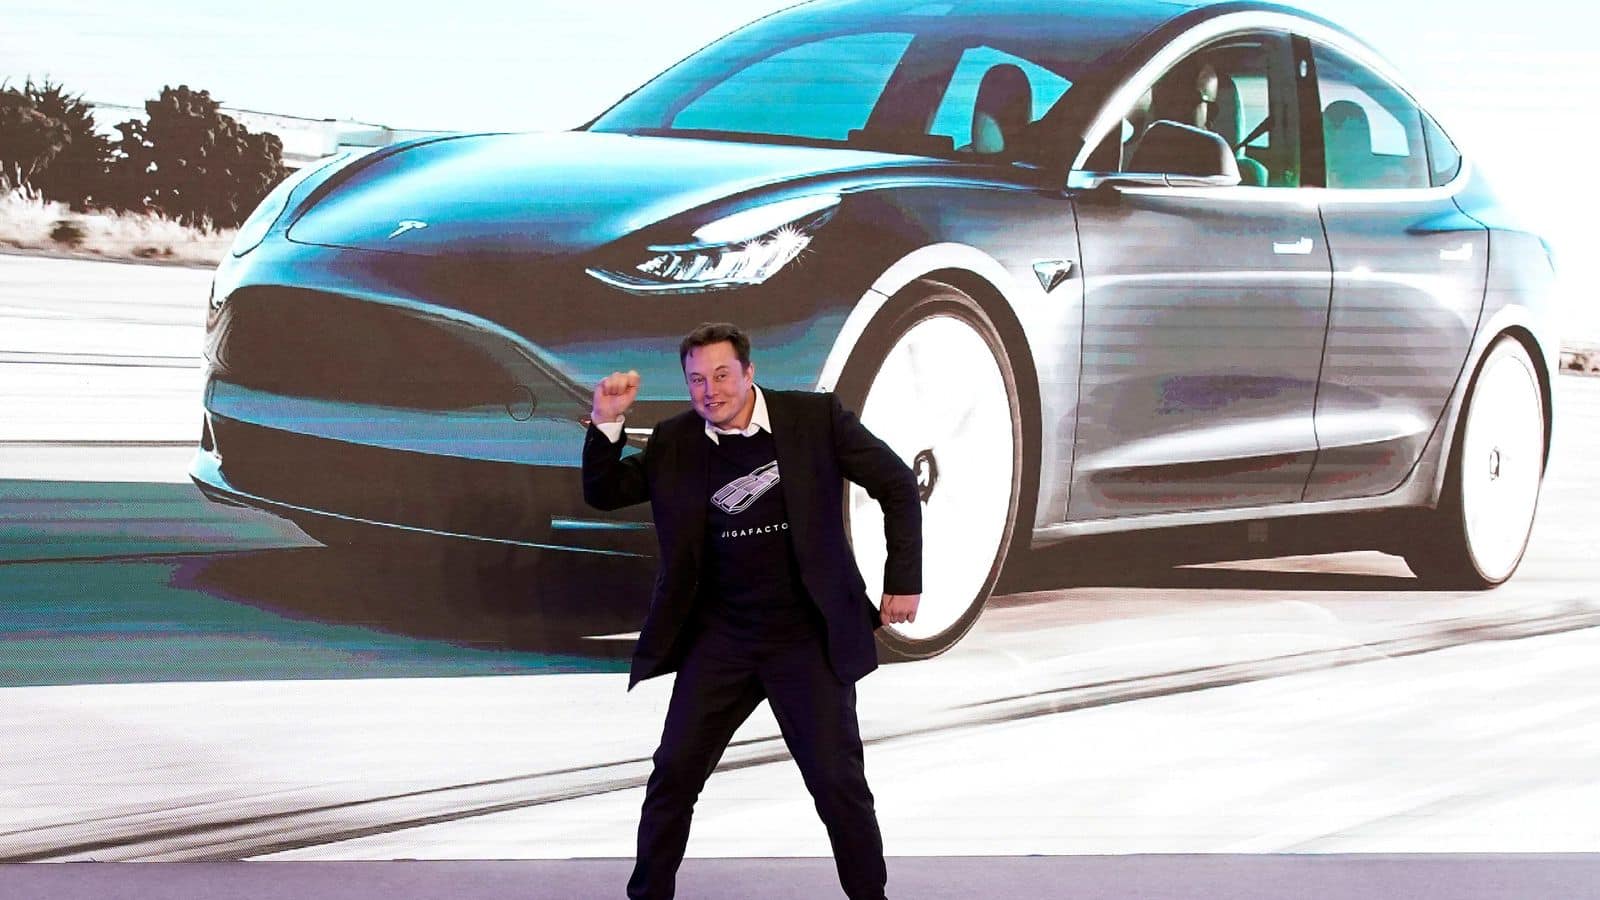 Elon Musk's Tesla faces bumpier ride breaking into India after China success